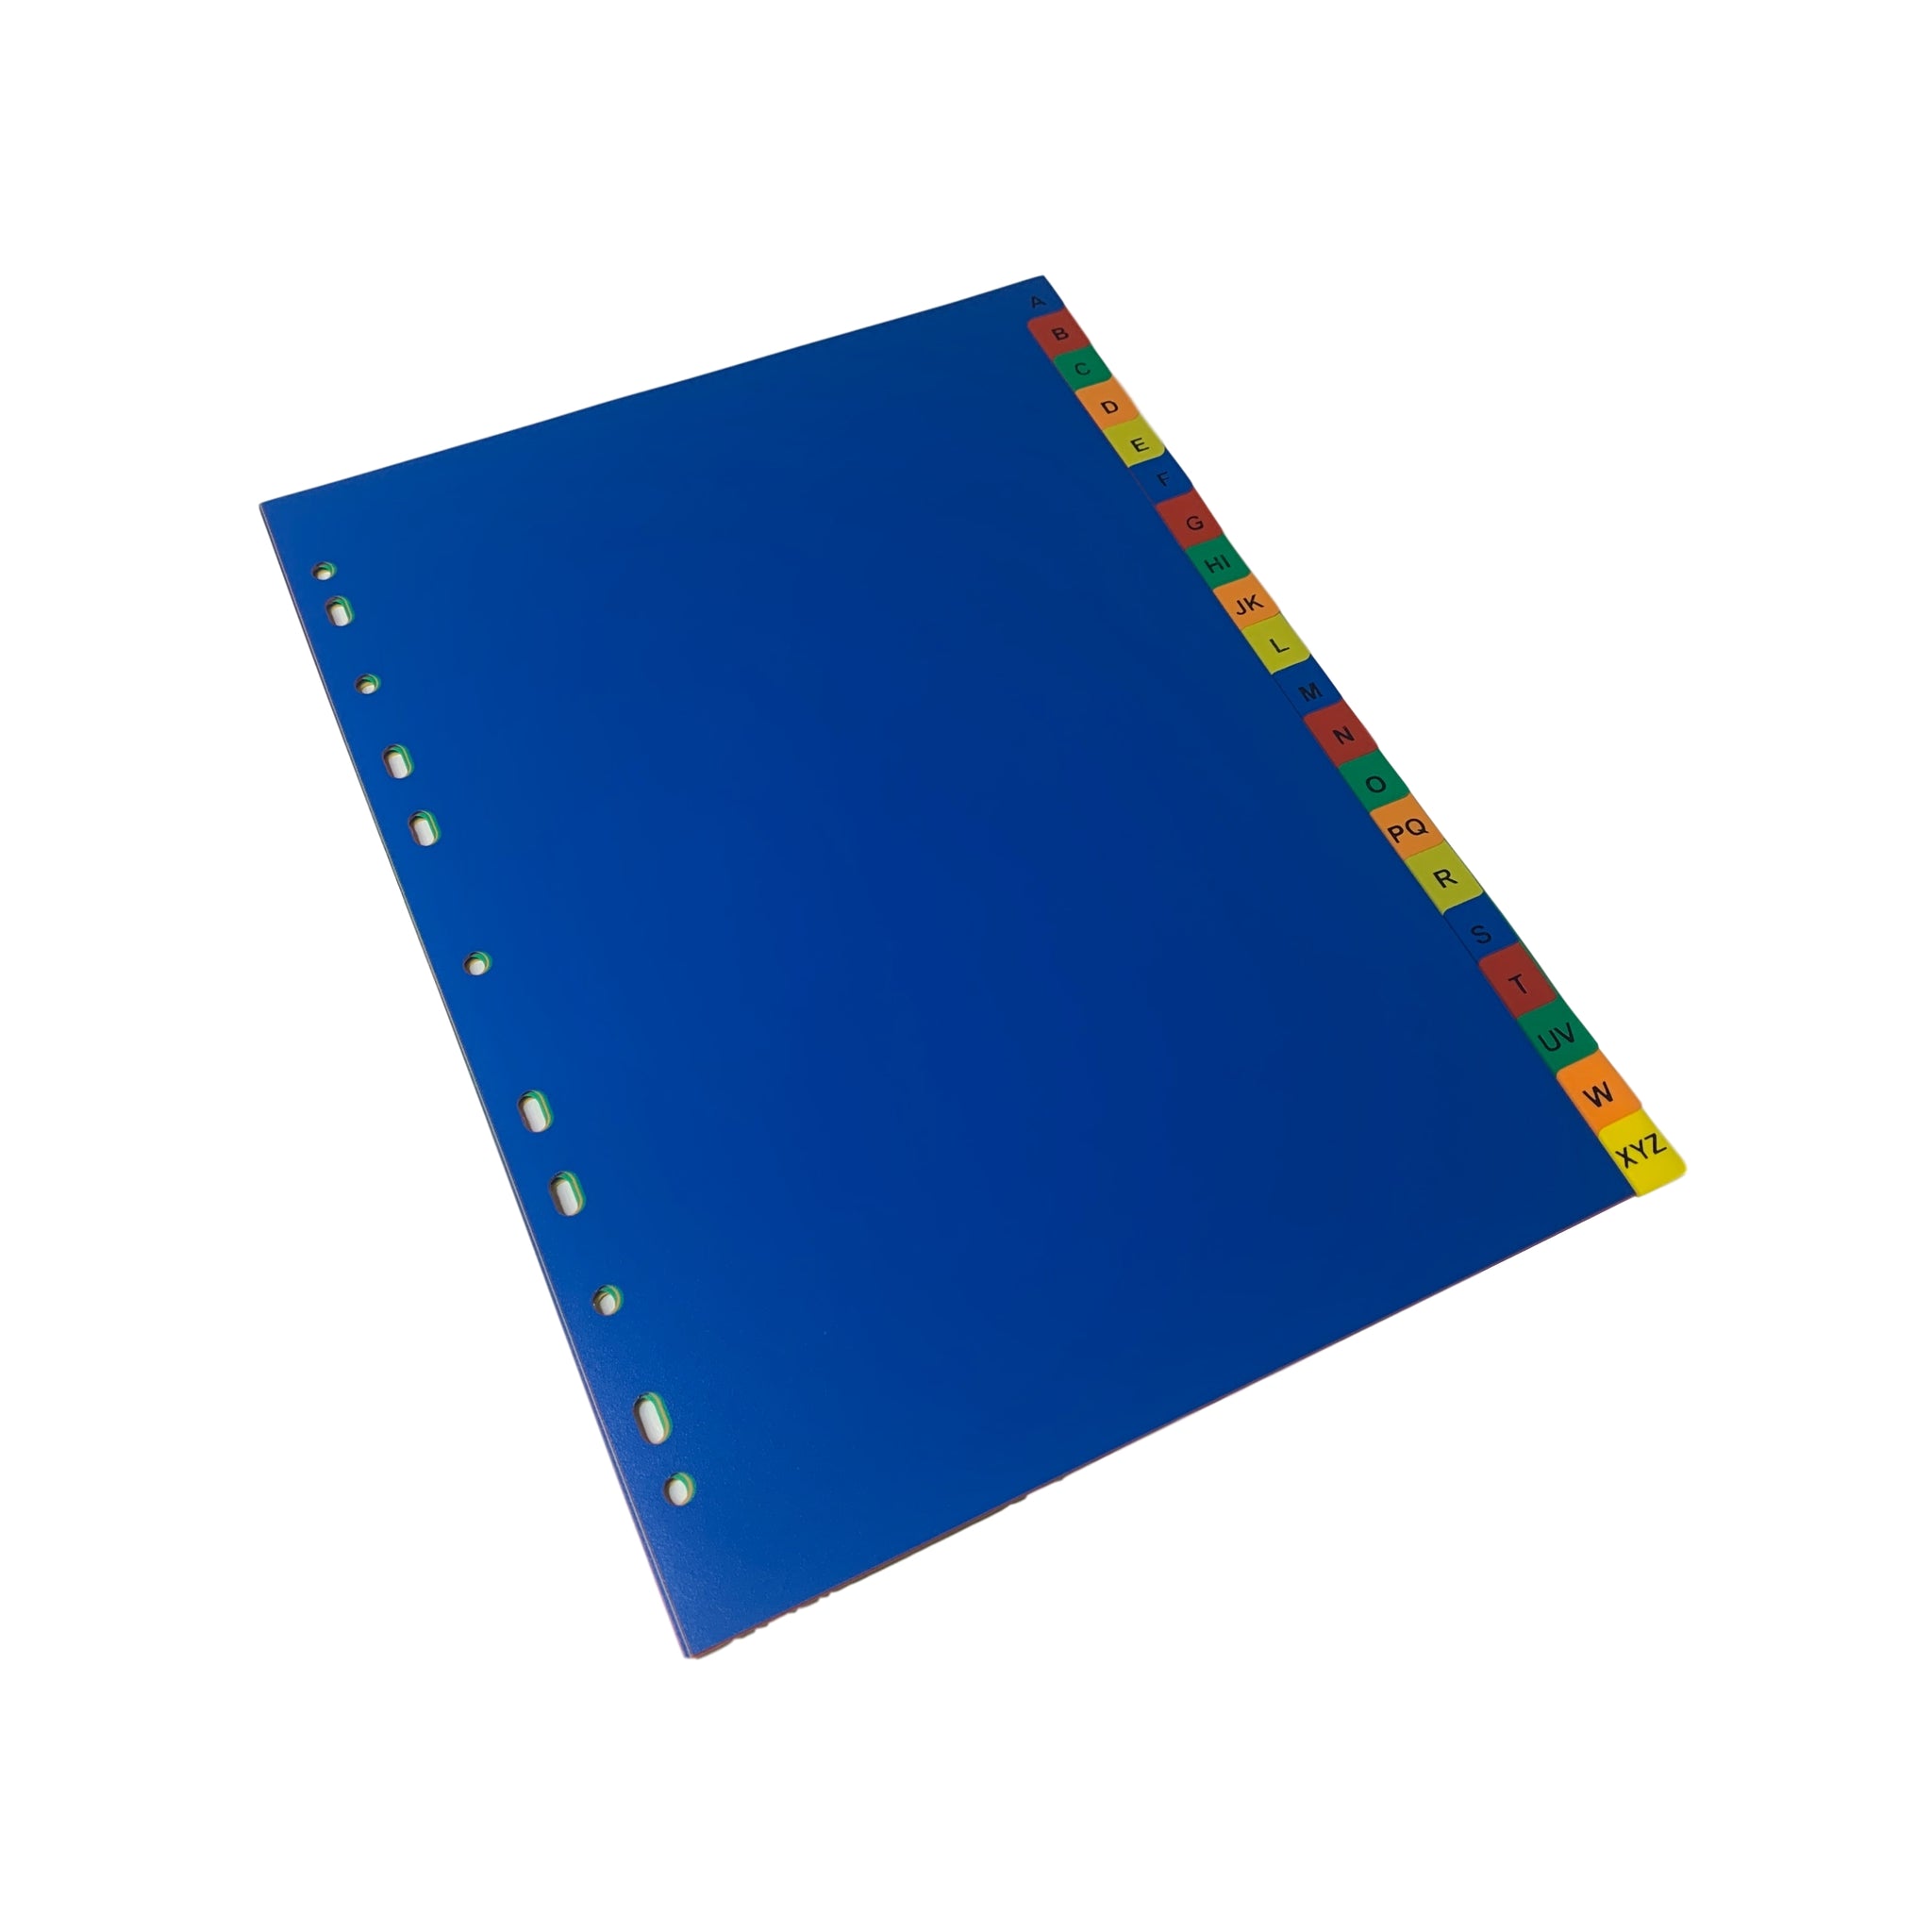 A4 A-Z 20 Part Polypropylene Dividers with Reinforced Index Cover